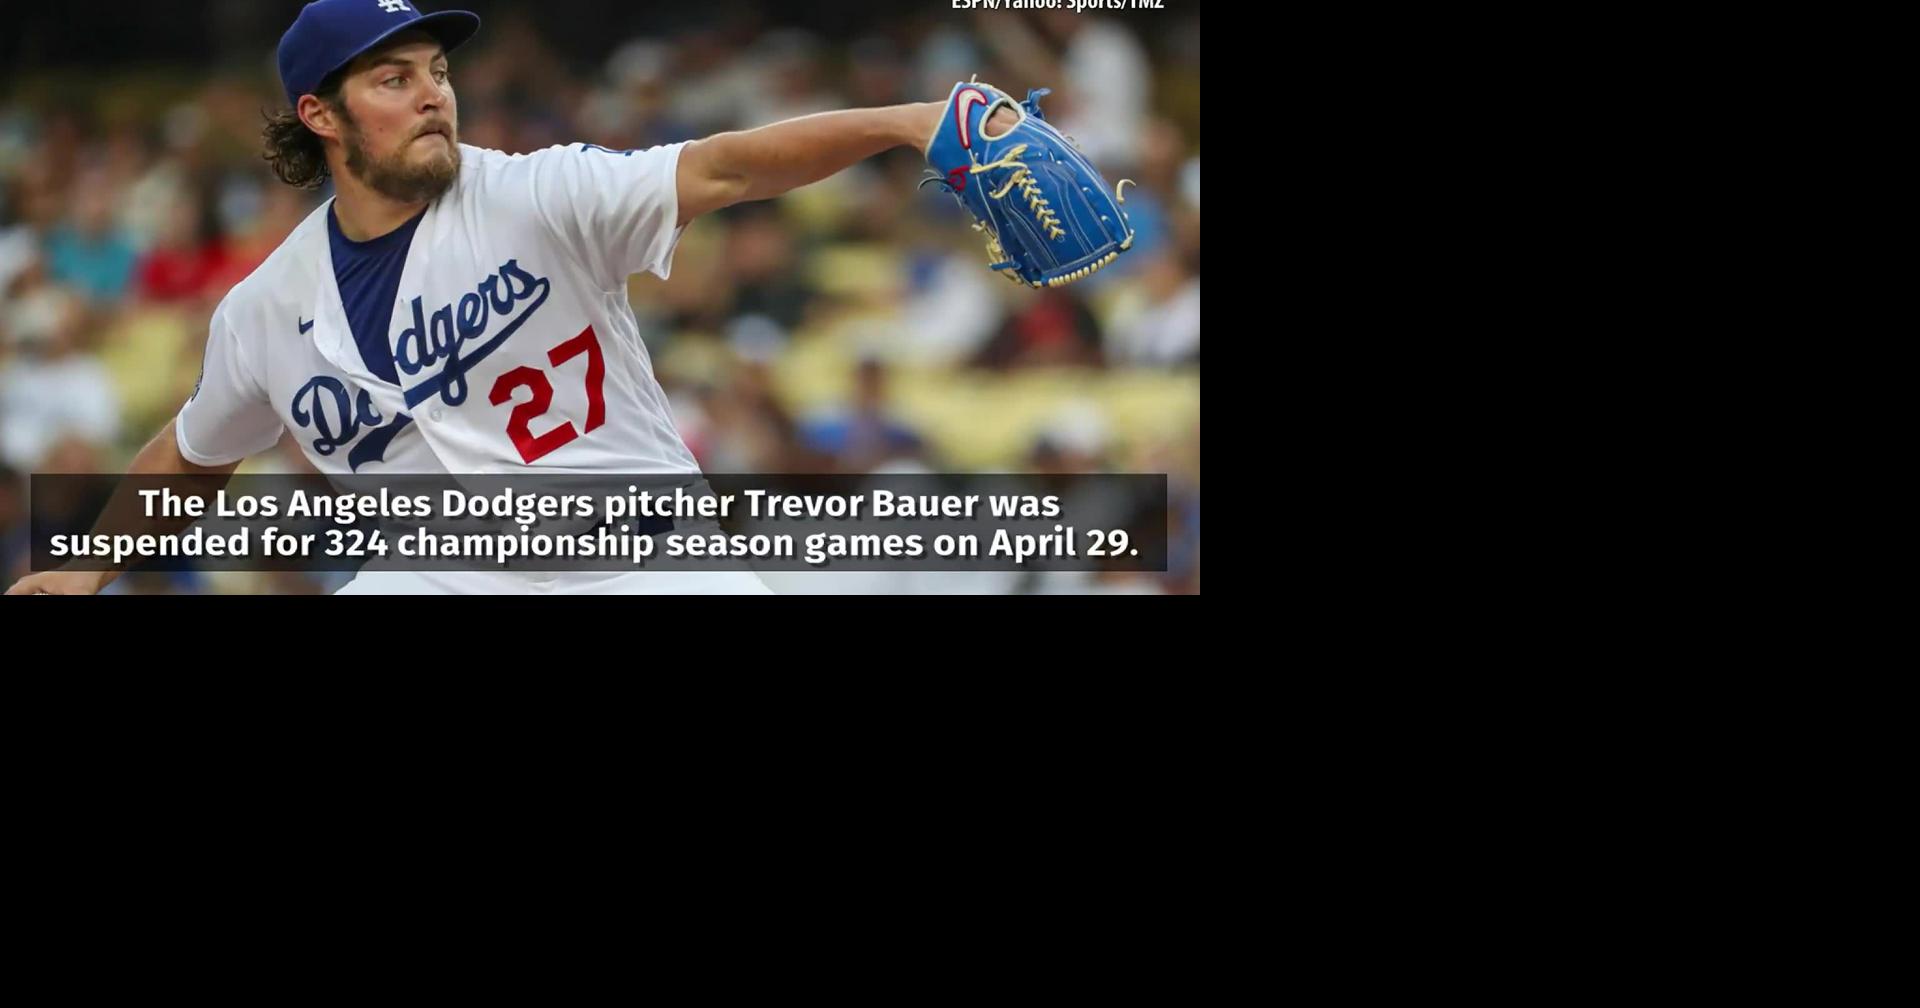 Los Angeles Dodgers pitcher Trevor Bauer suspended for 2 years, Trending